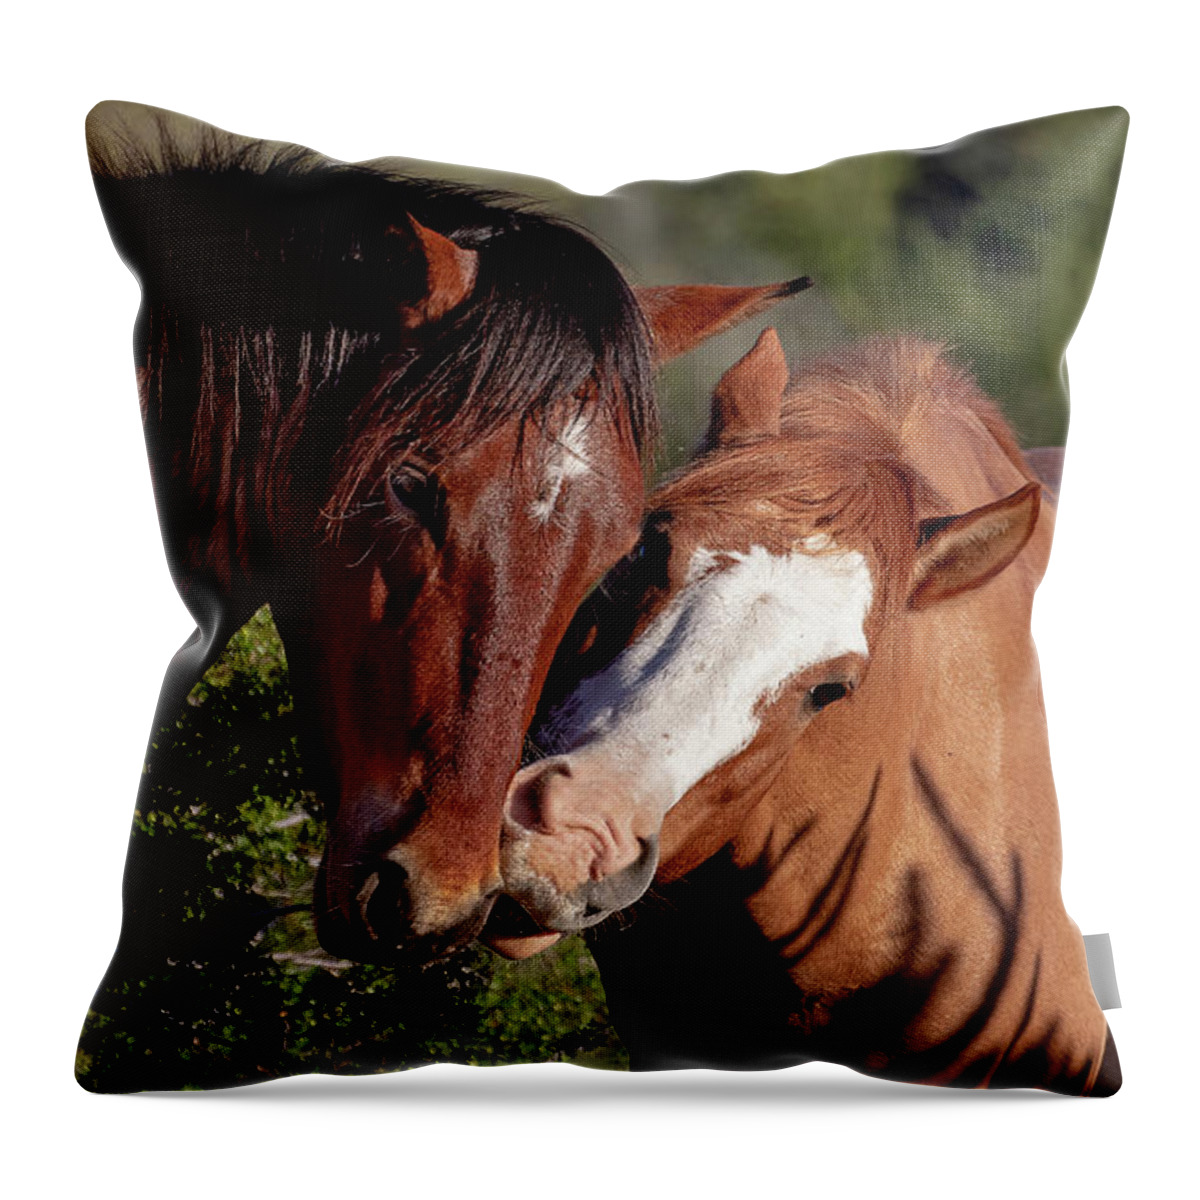 Wild Horses Throw Pillow featuring the photograph Mustang Greeting by Mindy Musick King